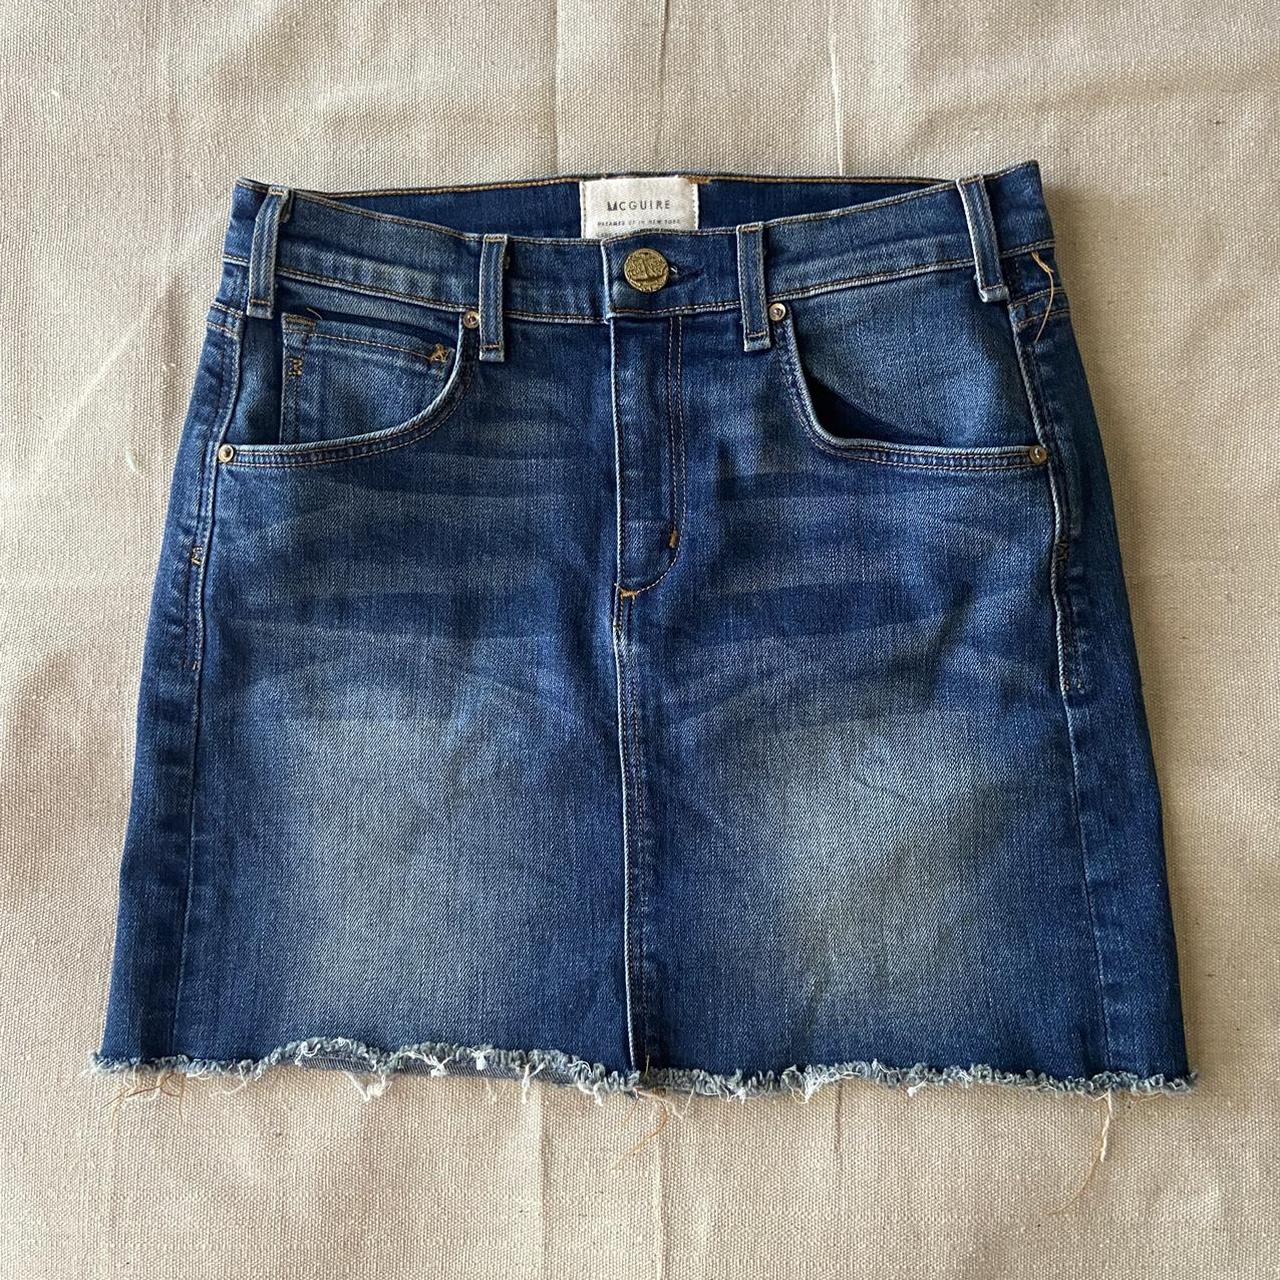 McGuire Denim Handcrafted Mini Skirt -New without... - Depop